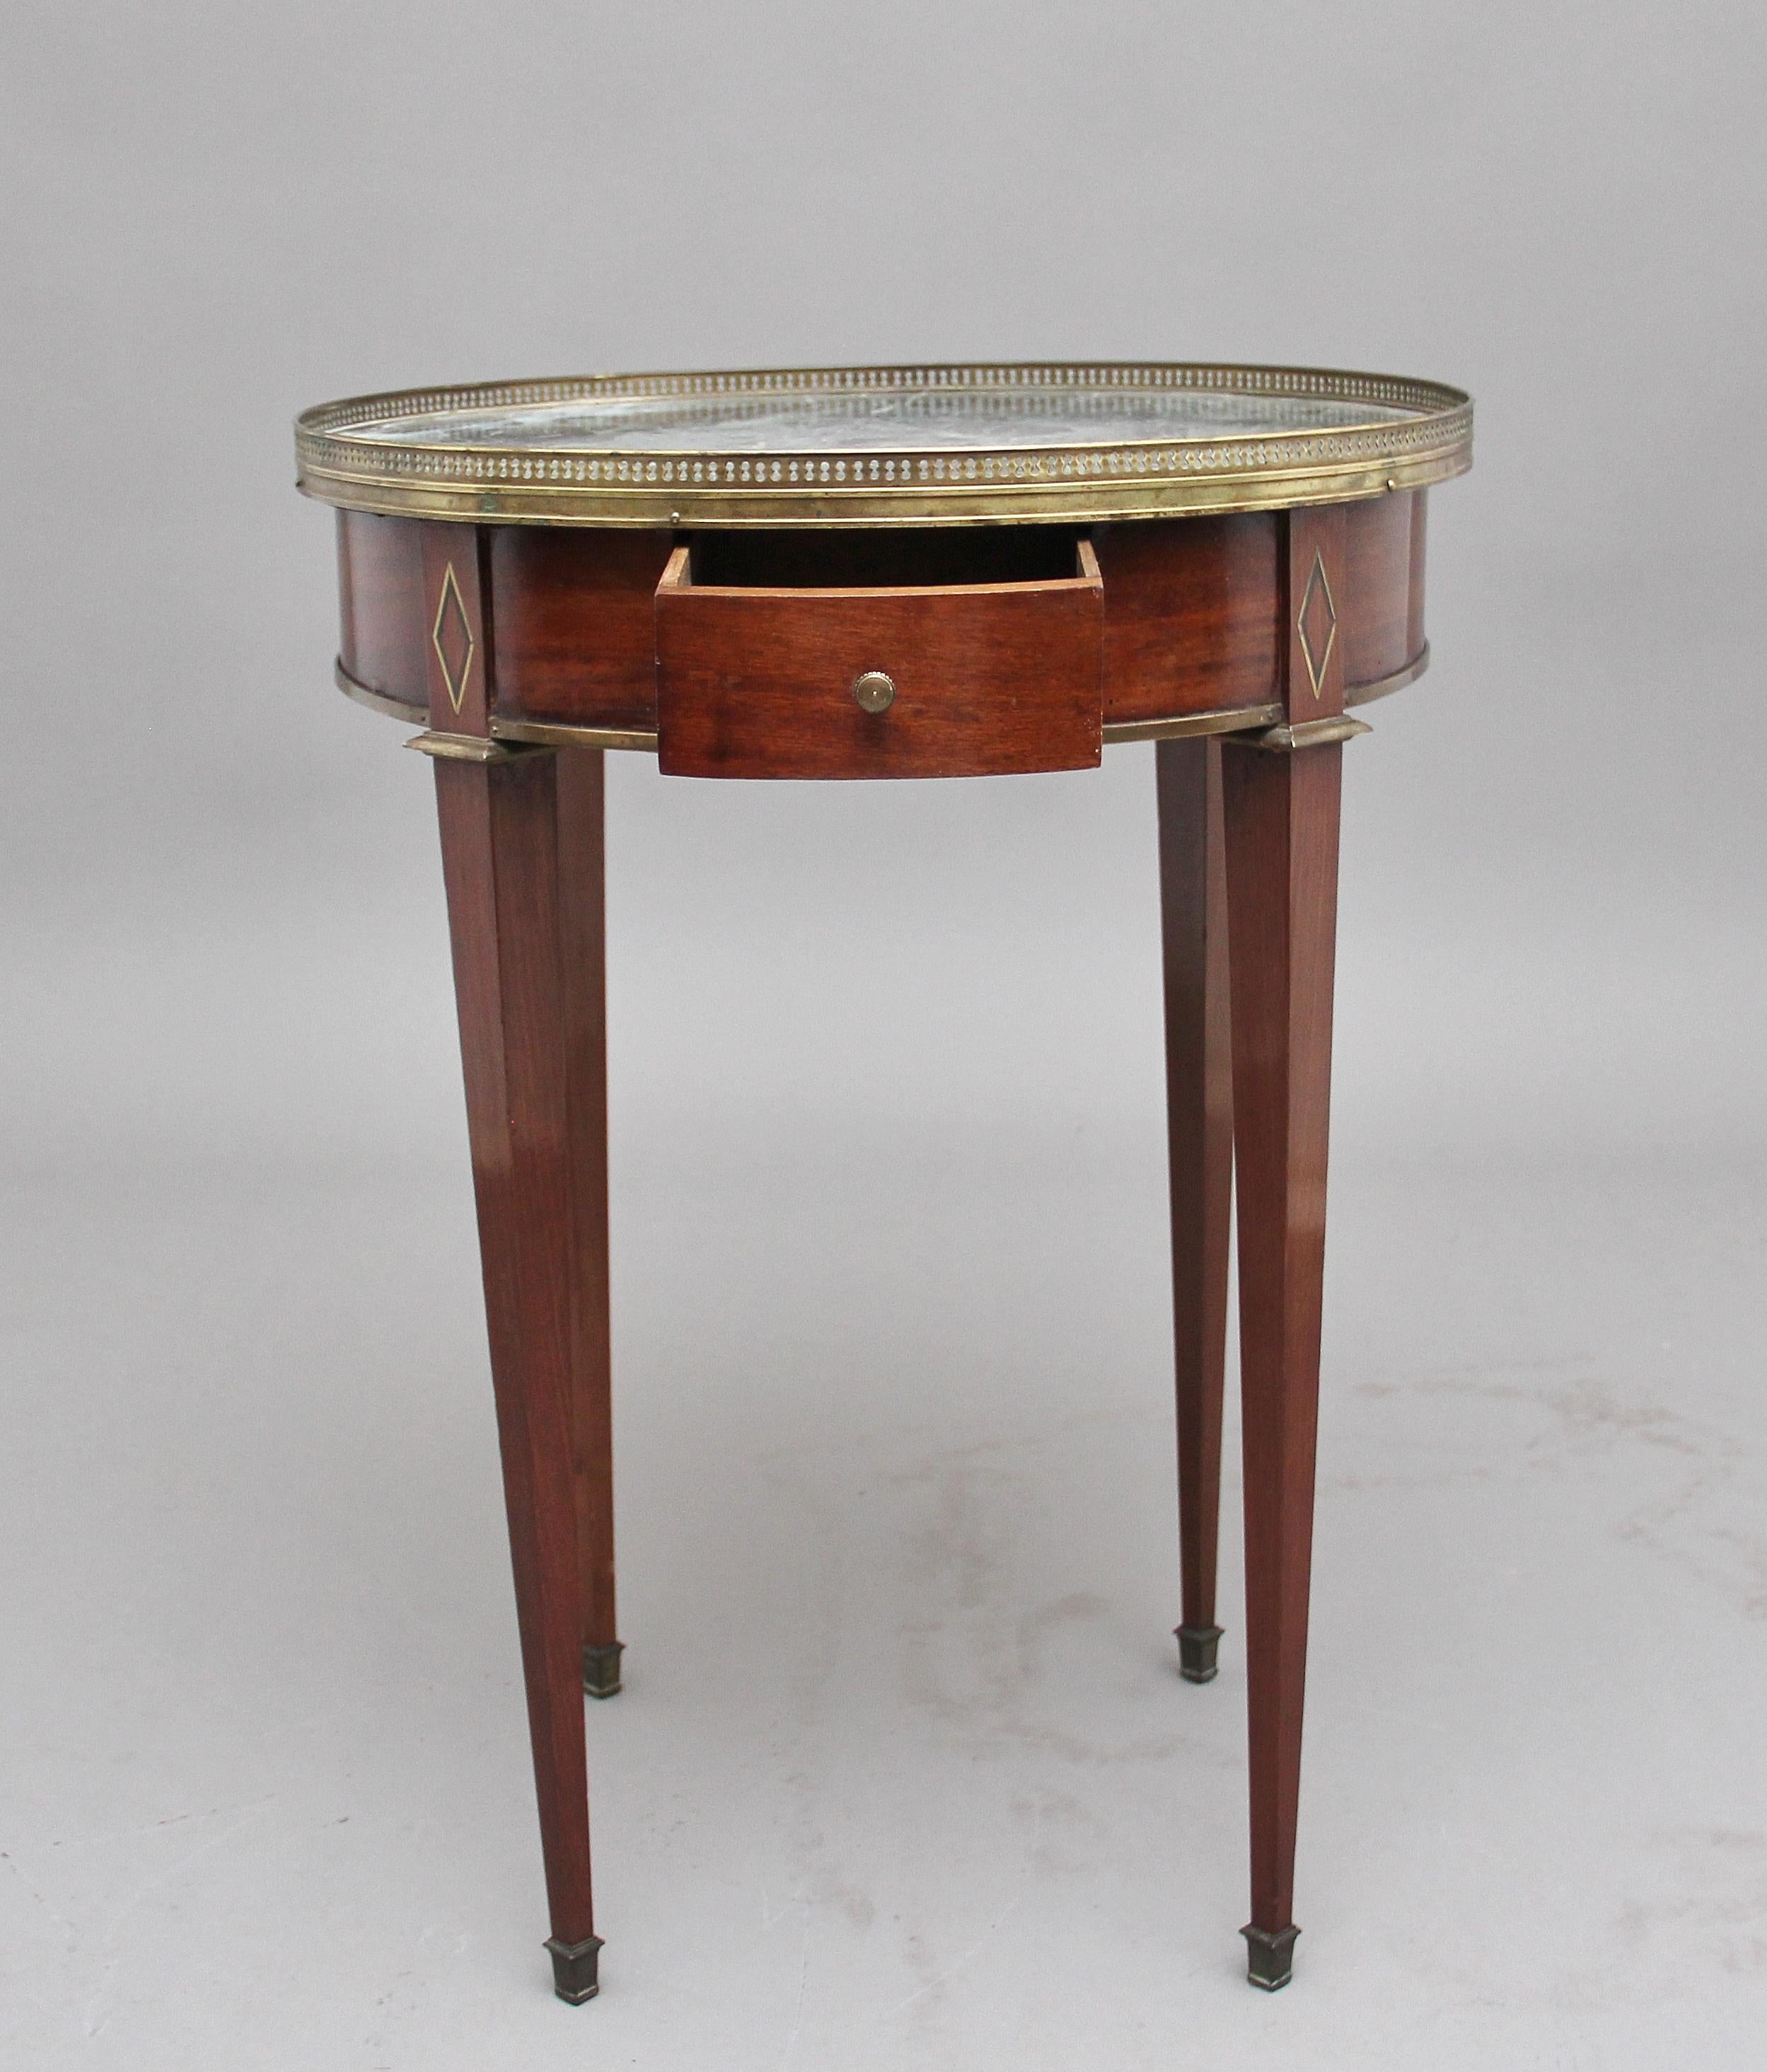 19th century French mahogany and marble-top occasional table, the circular top with a pierced brass gallery with a decorative green marble insert, the apron below having an oak lined drawer at the front, standing on square tapering legs terminating